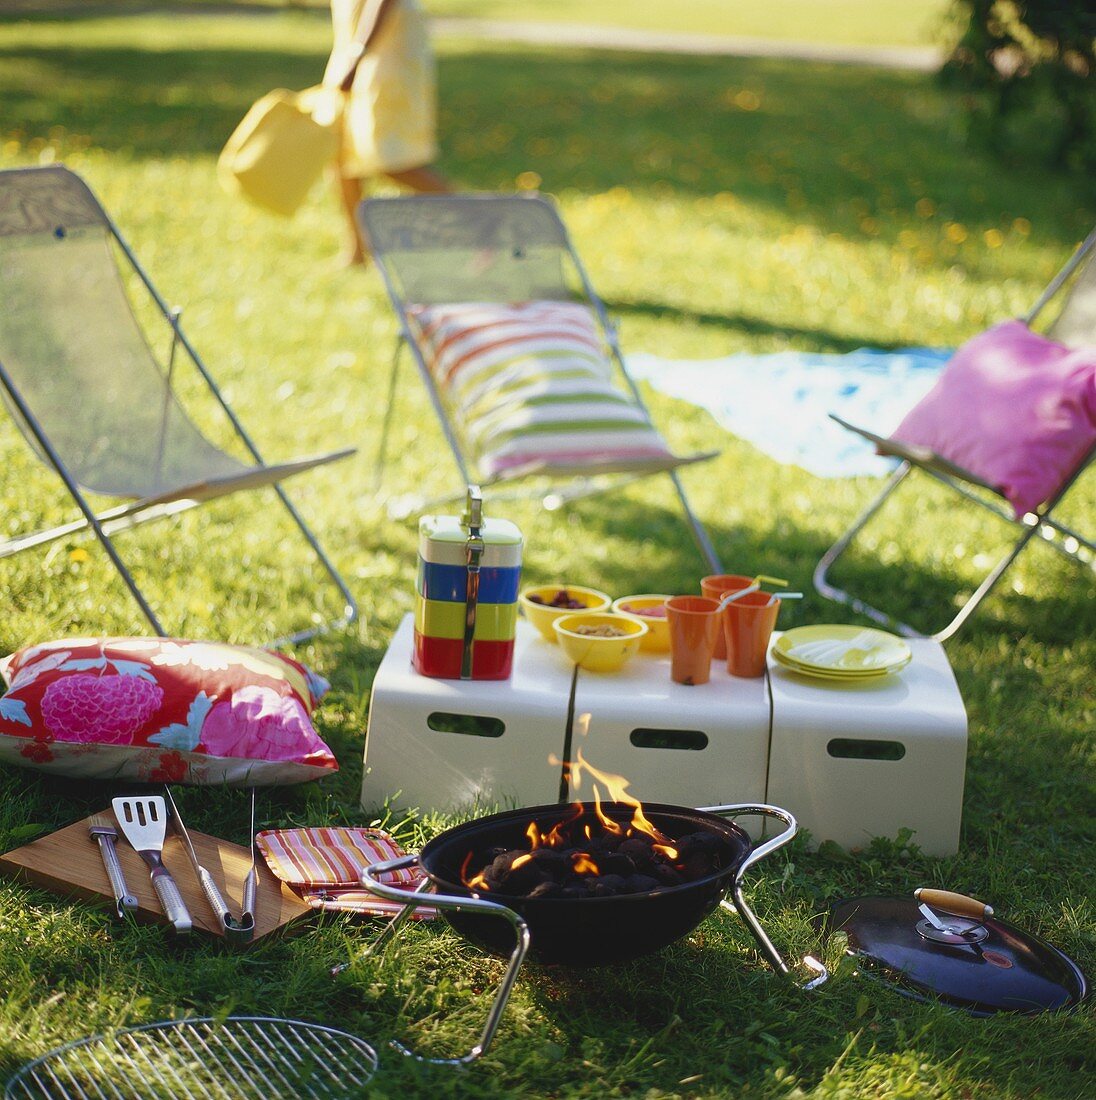 Summer picnic with barbecue in the open air